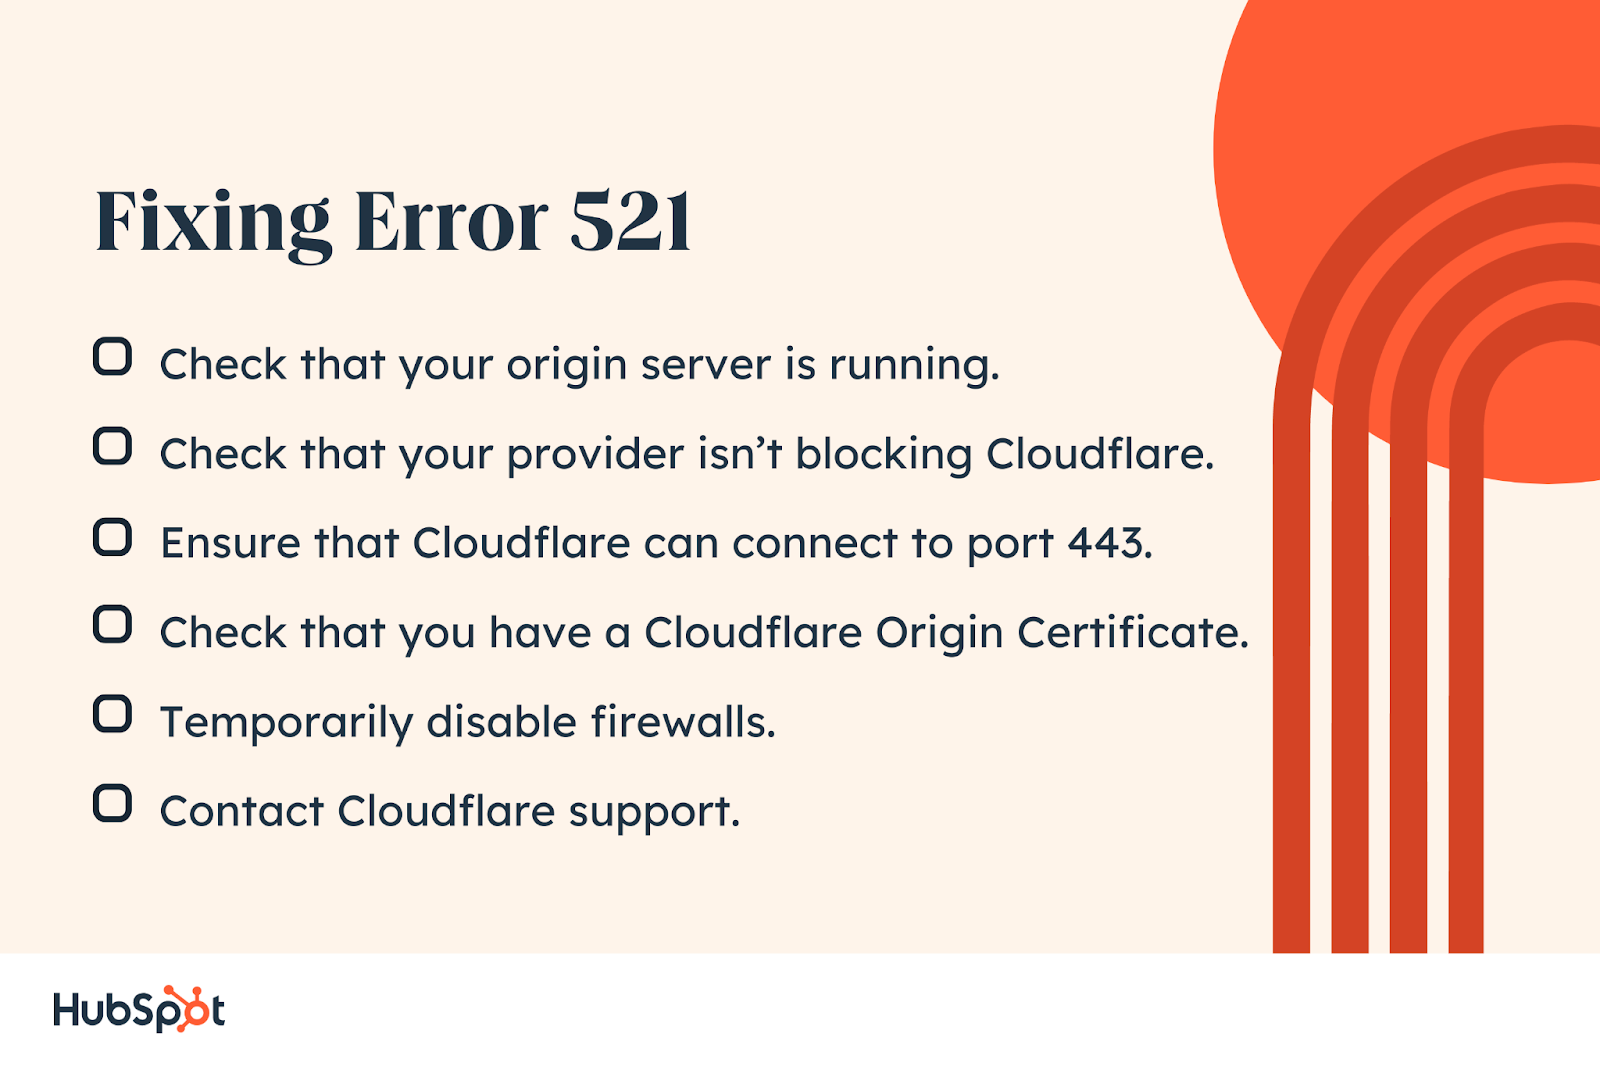 Fixing Error 521. Check that your provider isn’t blocking Cloudflare. Ensure that Cloudflare can connect to port 443. Check that you have a Cloudflare Origin Certificate. Check that your origin server is running. Temporarily disable firewalls. Contact Cloudflare support.